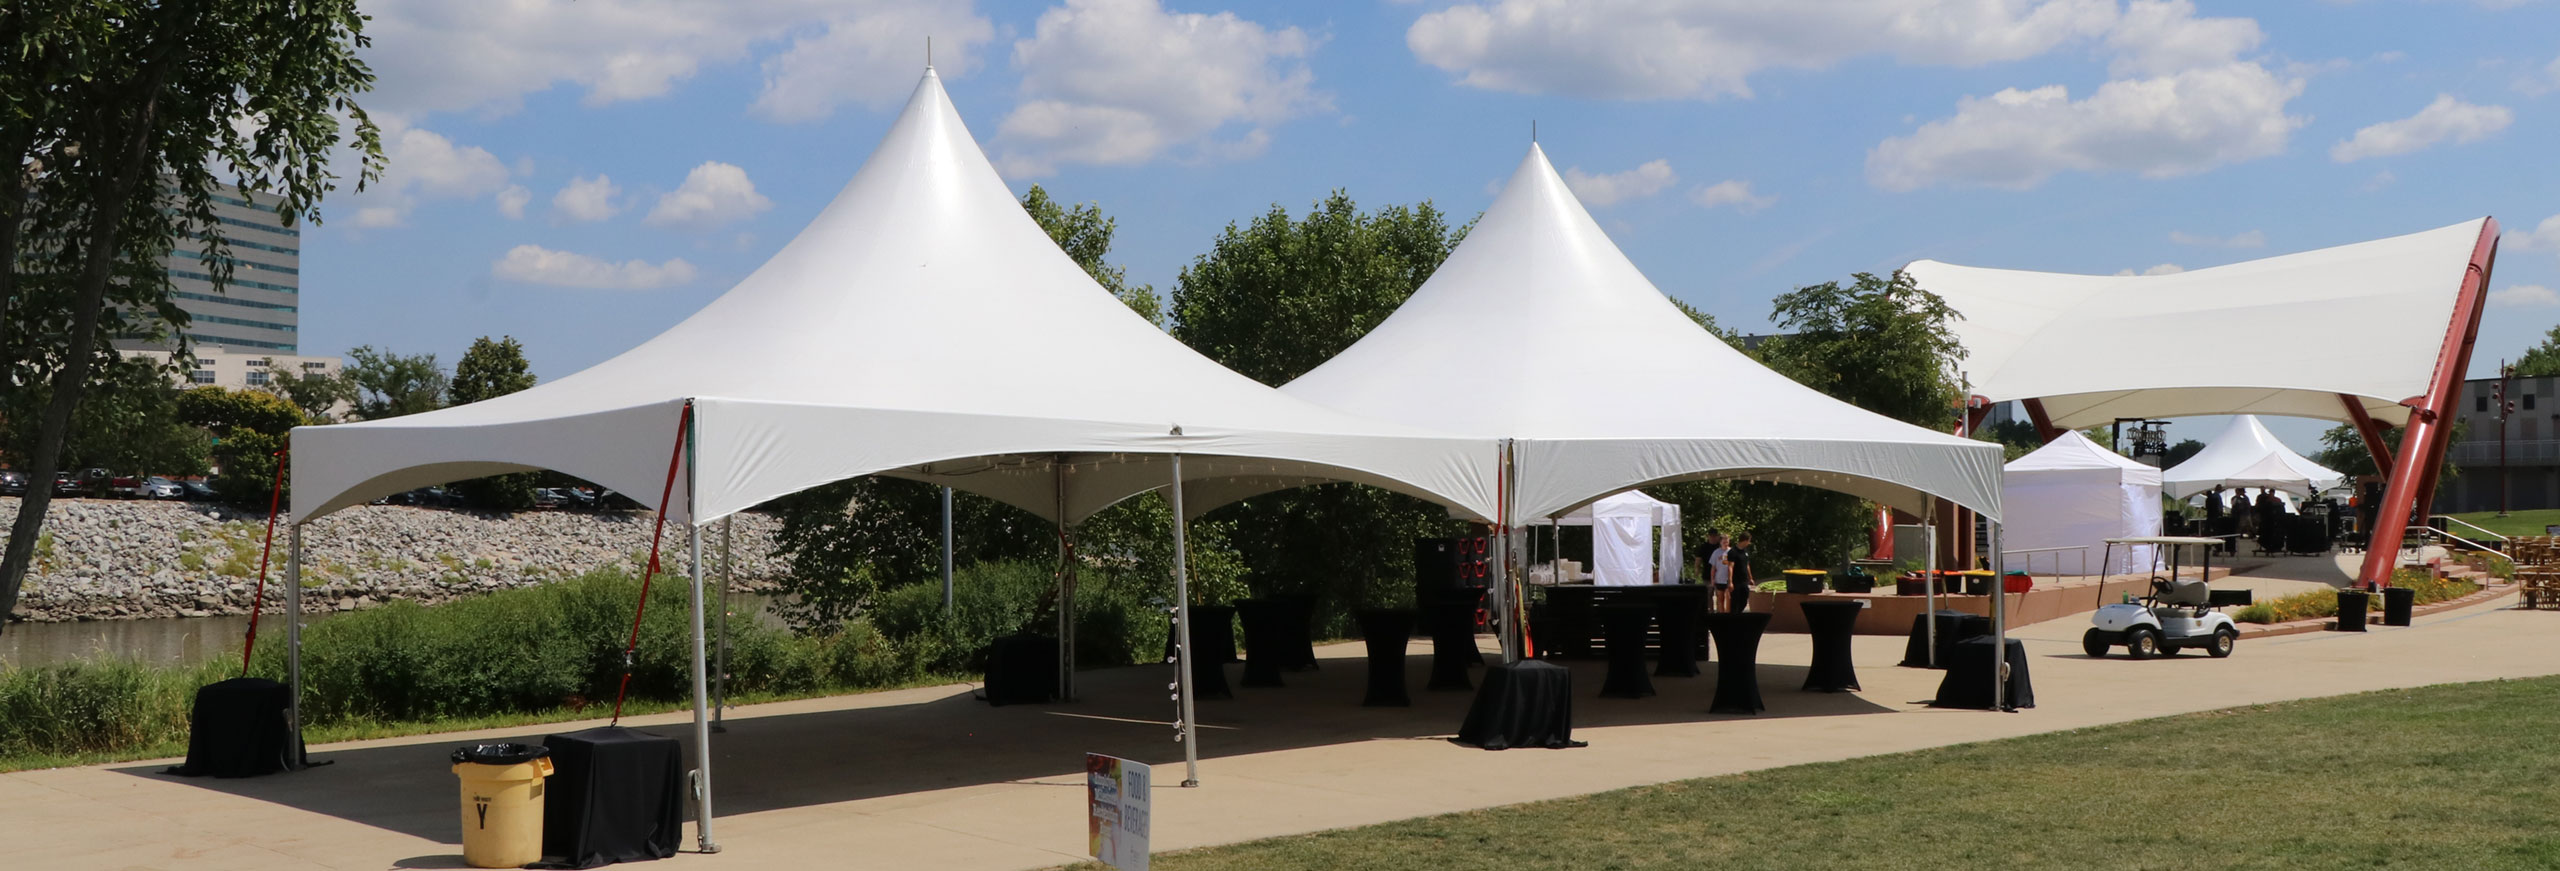 corporate tent rental for Des Moines